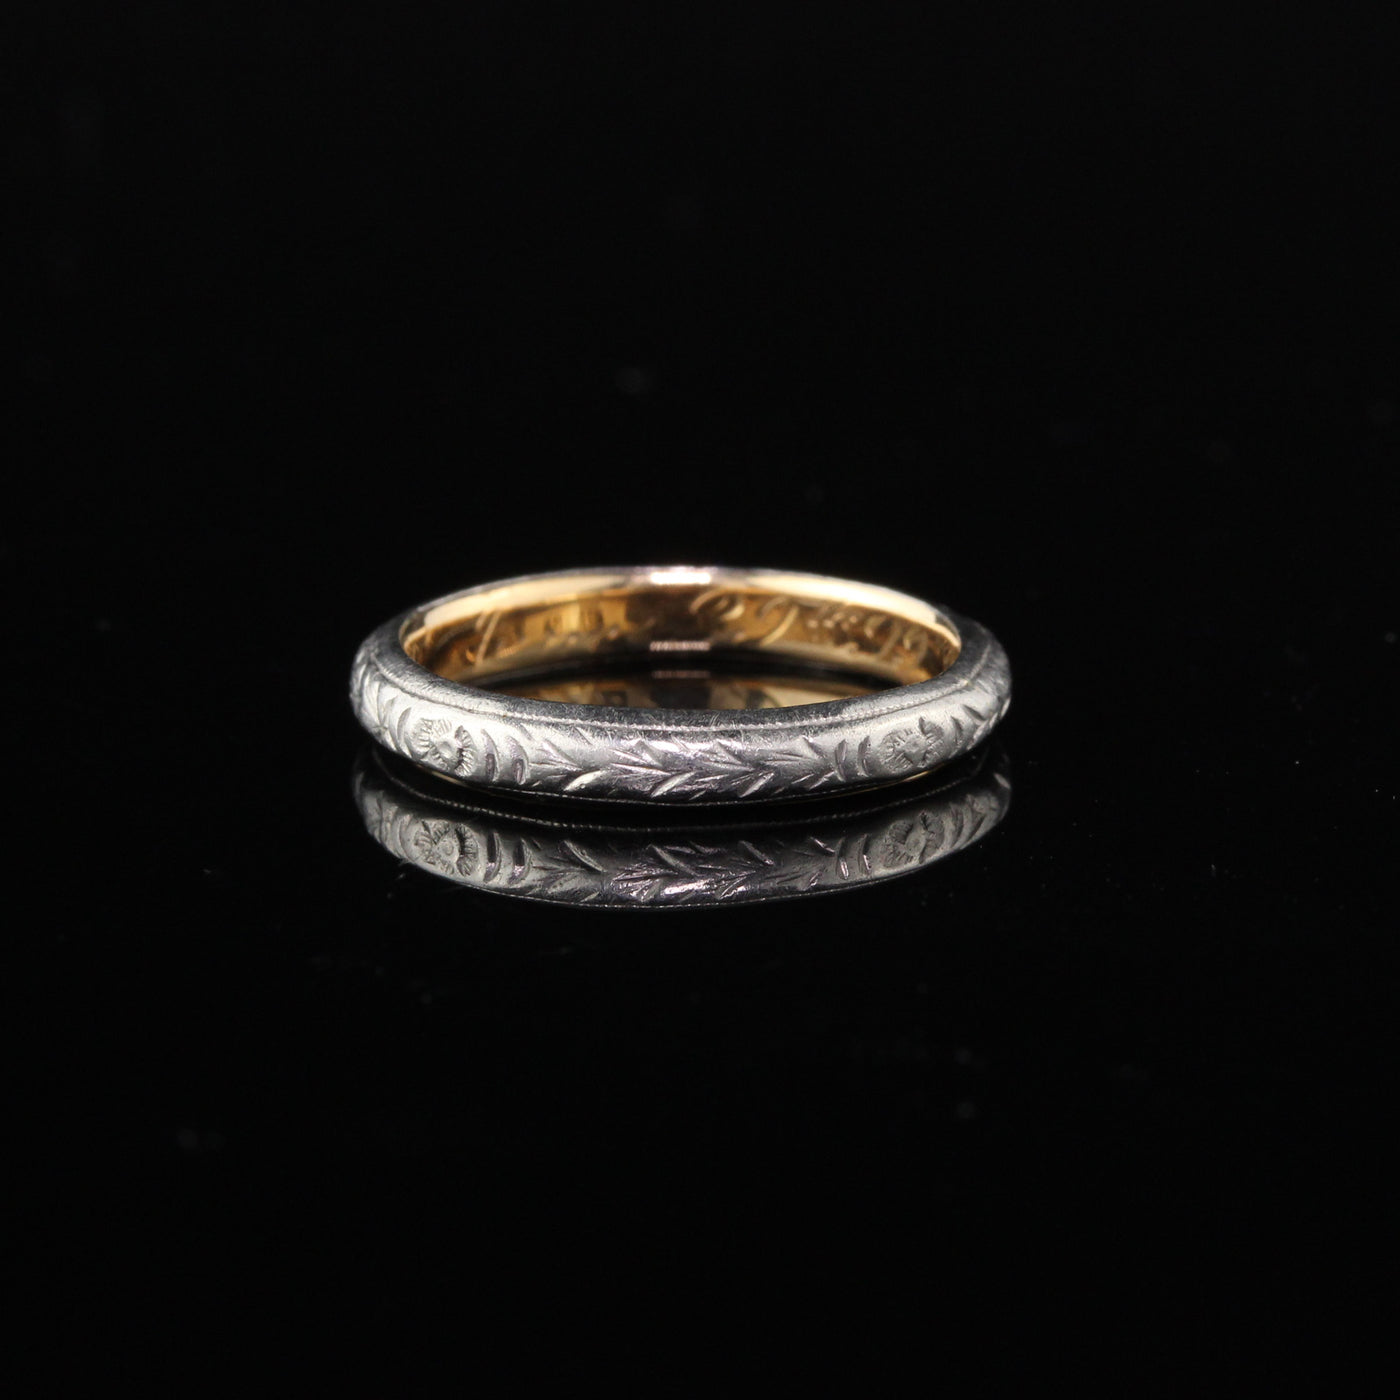 Antique Victorian Engraved Platinum And 18K Yellow Gold Wedding Band - Size 5 1/4